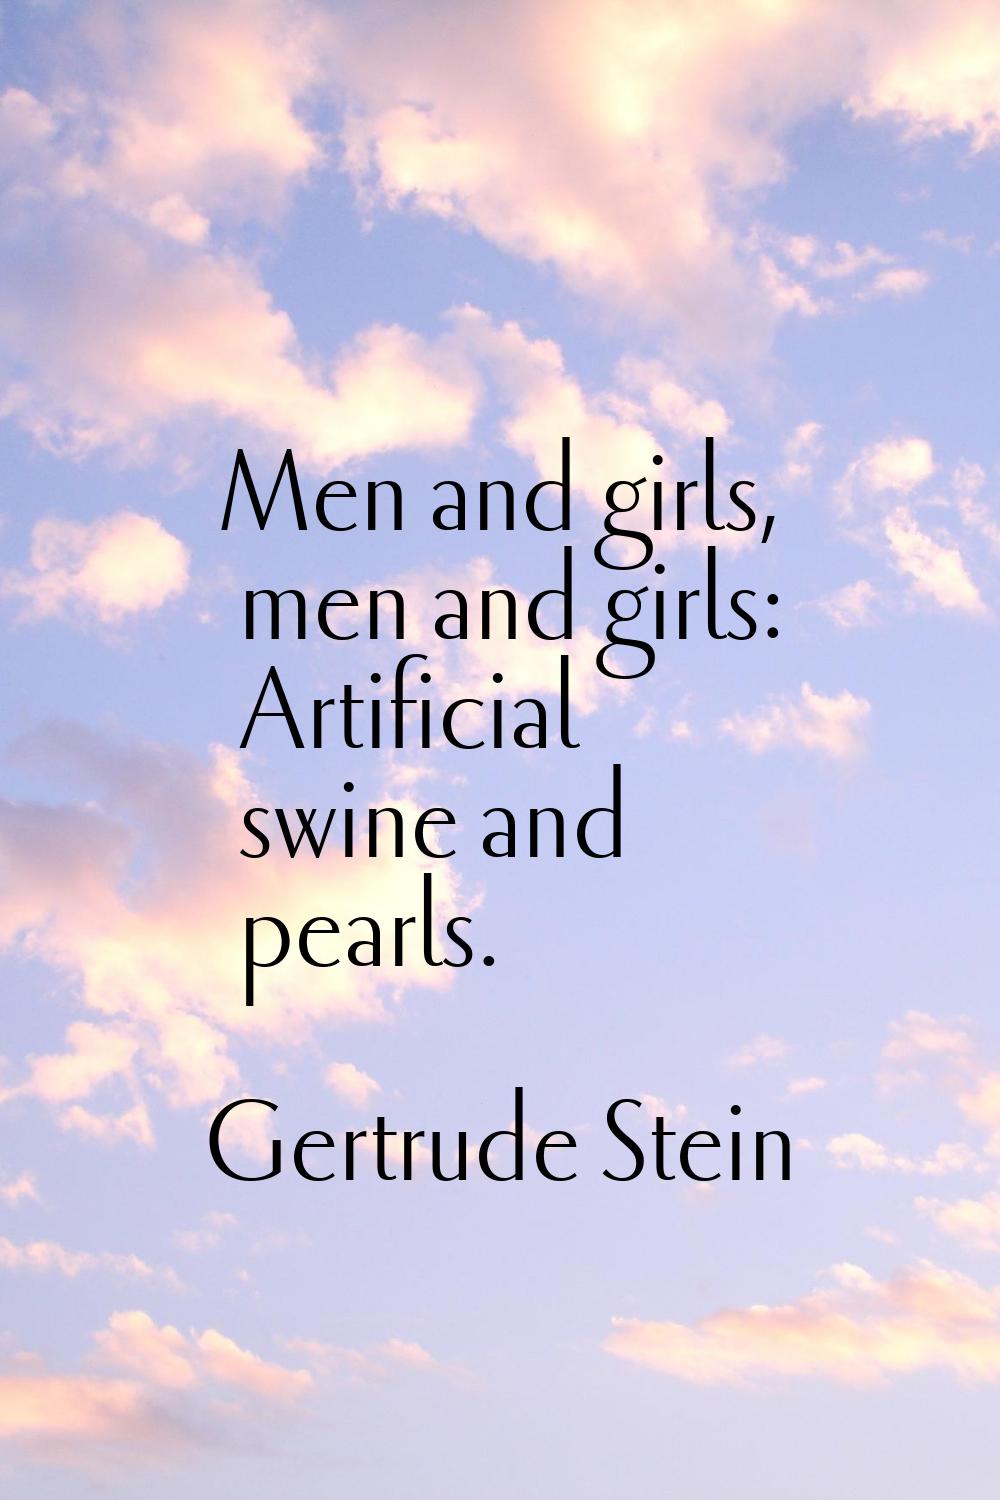 Men and girls, men and girls: Artificial swine and pearls.